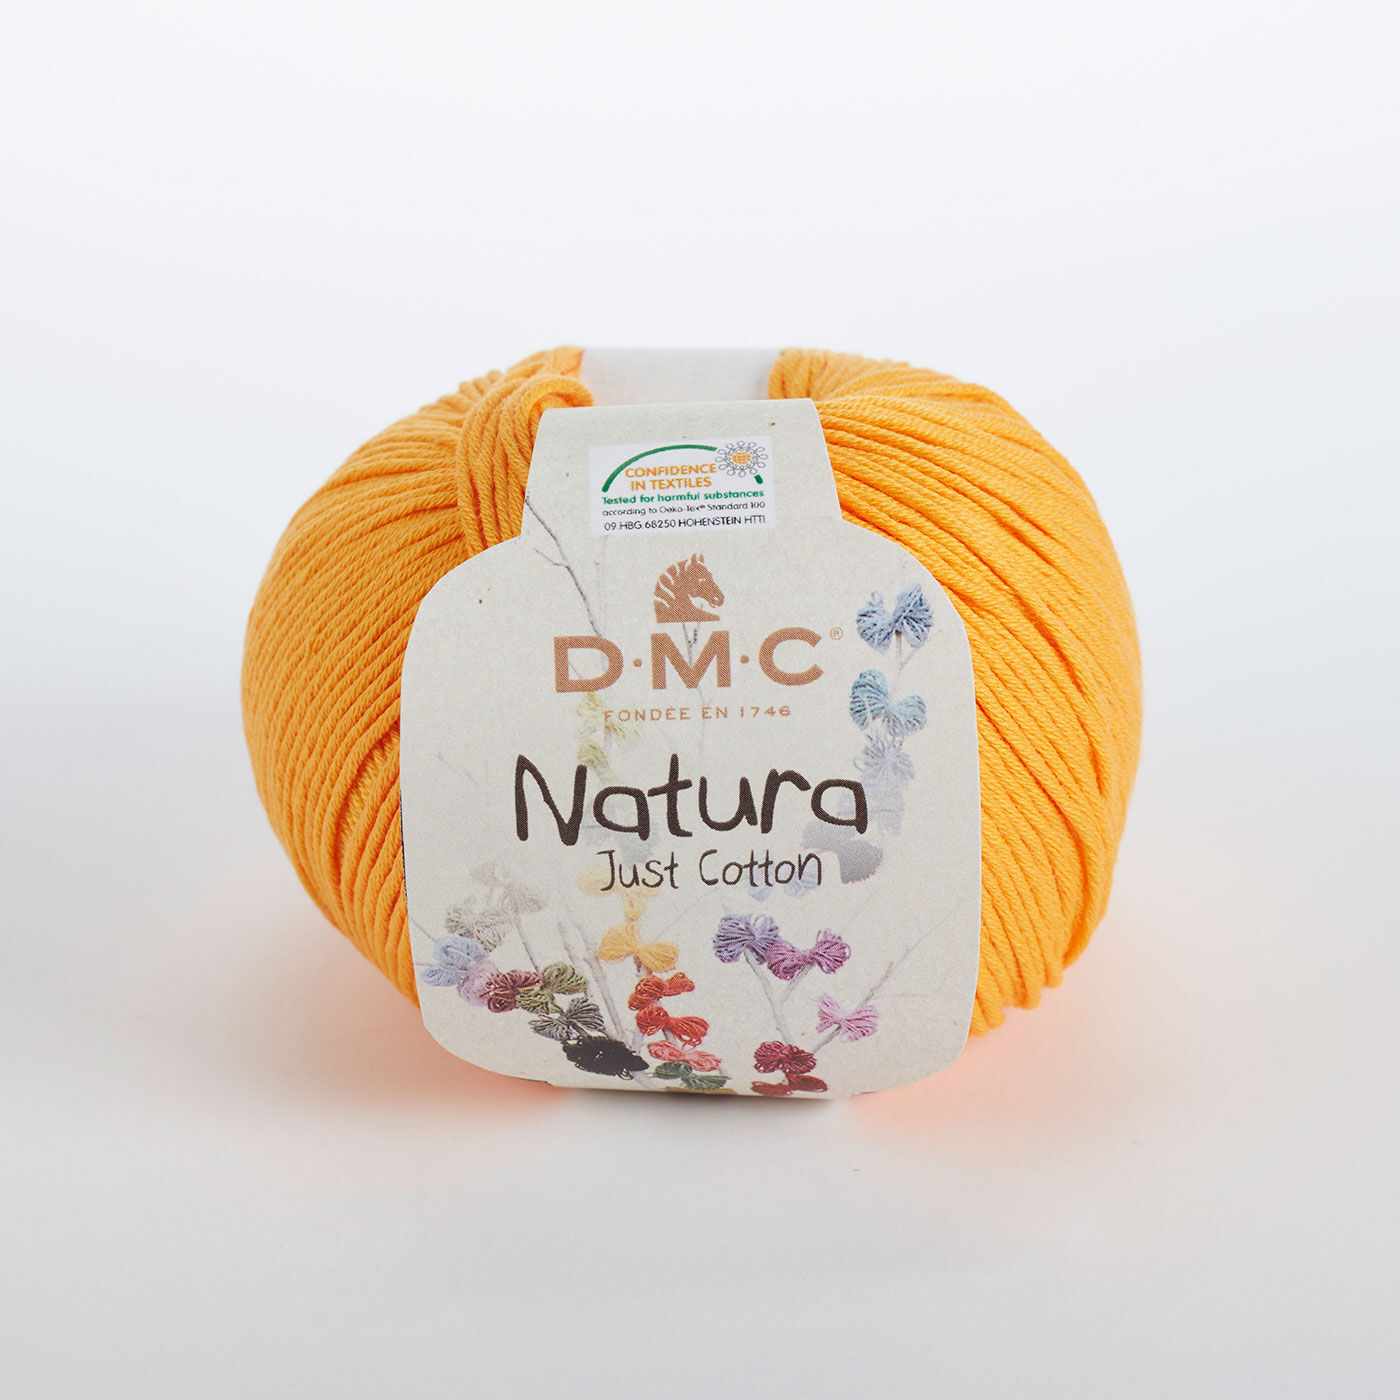 Couturier special|ＤＭＣ Ｎａｔｕｒａ（ナチュラ）で編む方眼編み水玉バッグキット|2.イエロー